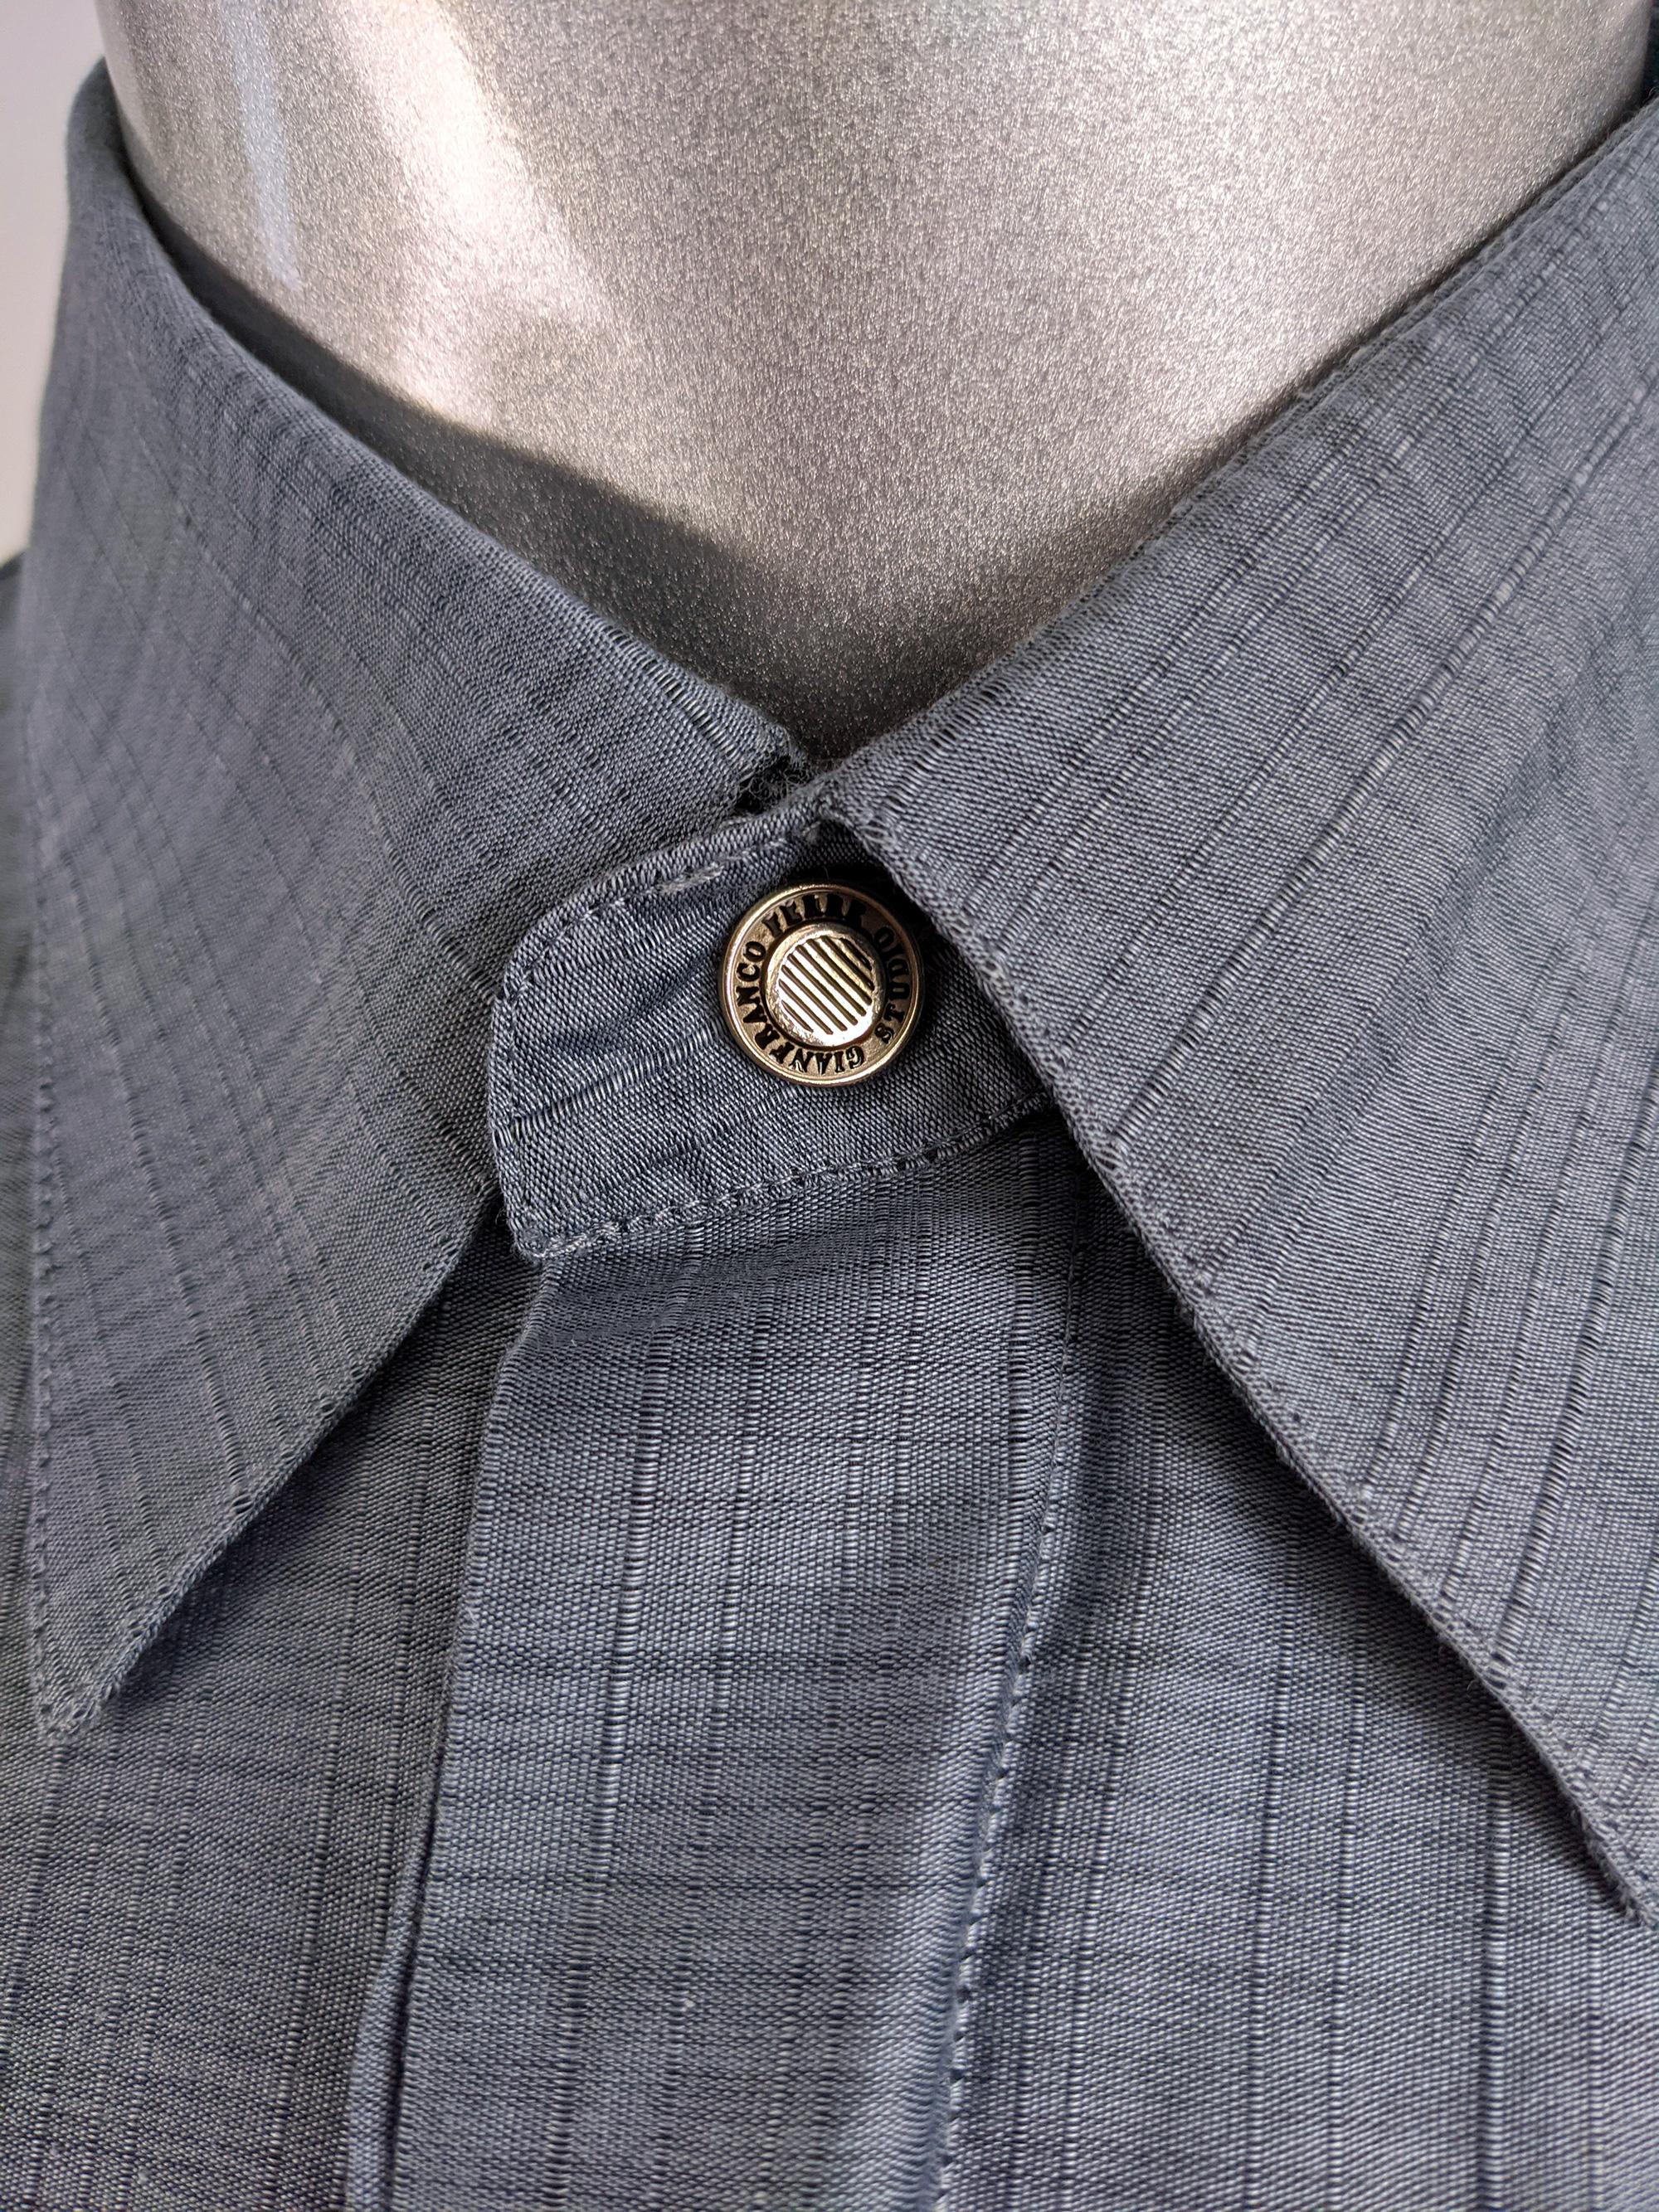 Gianfranco Ferre 1990s Formal Shirt Vintage Detachable Collar Grey Blue Shirt In Good Condition For Sale In Doncaster, South Yorkshire